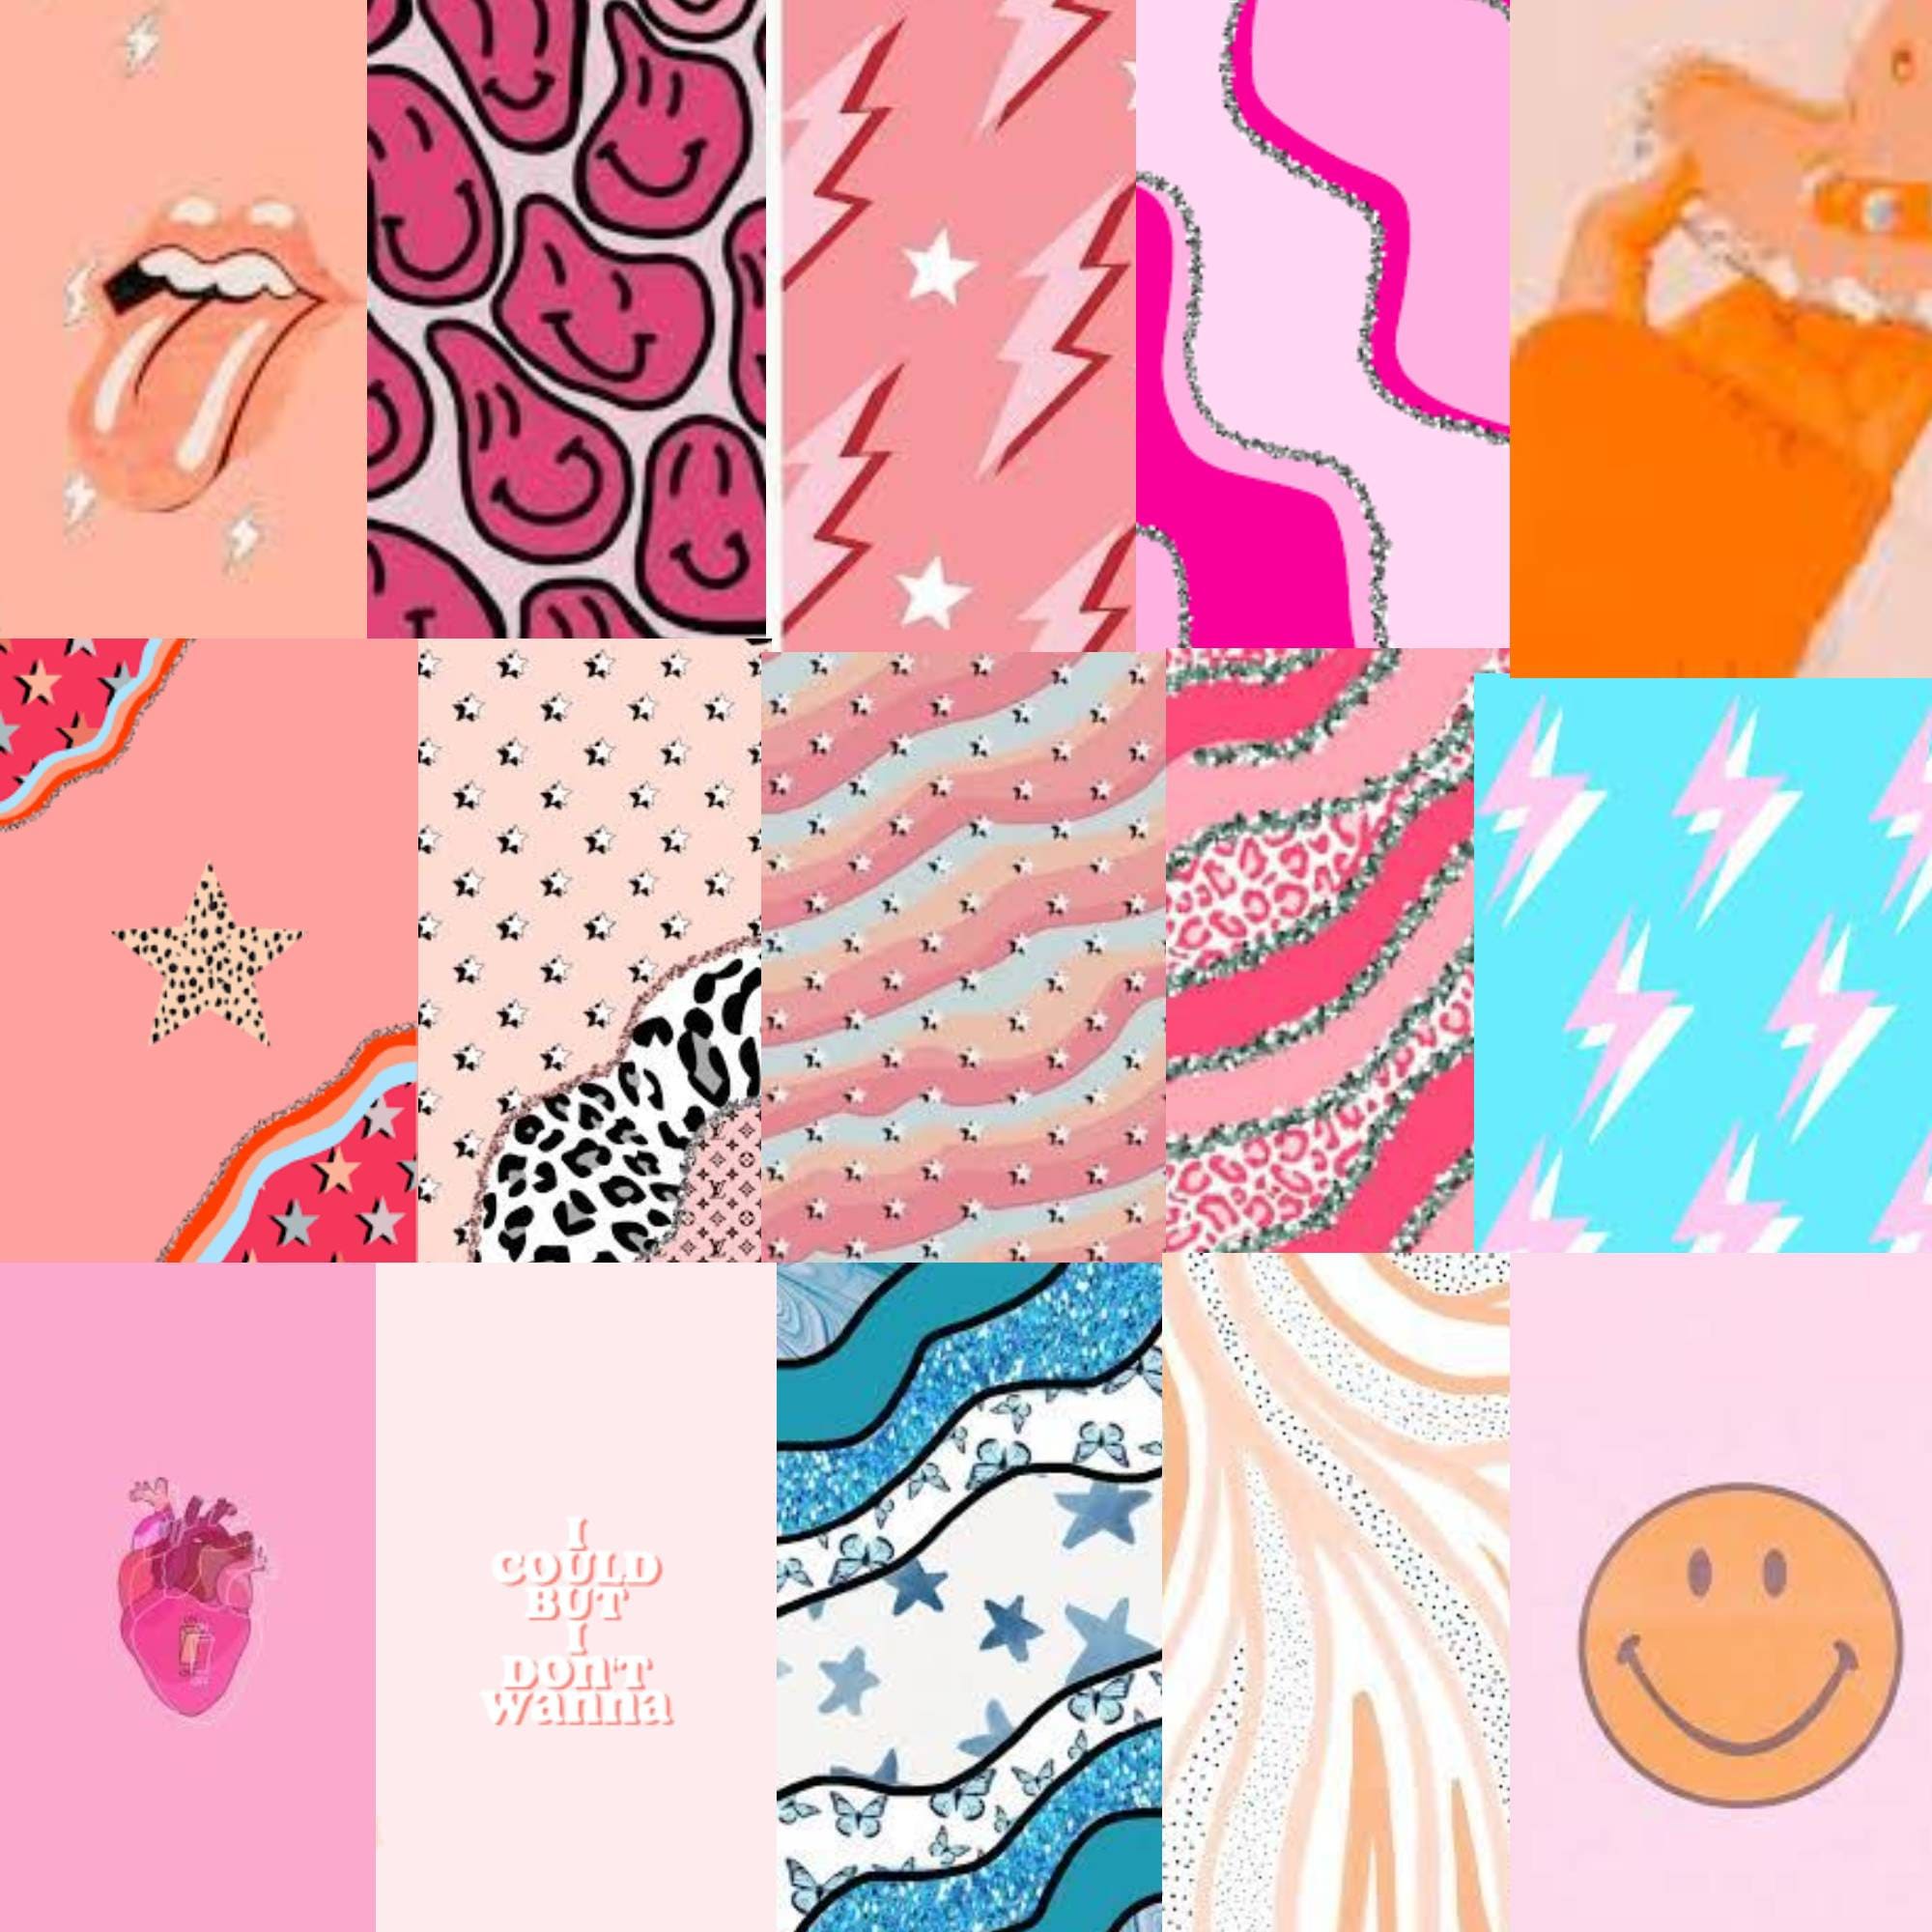 A collection of different colored and patterned images - Preppy